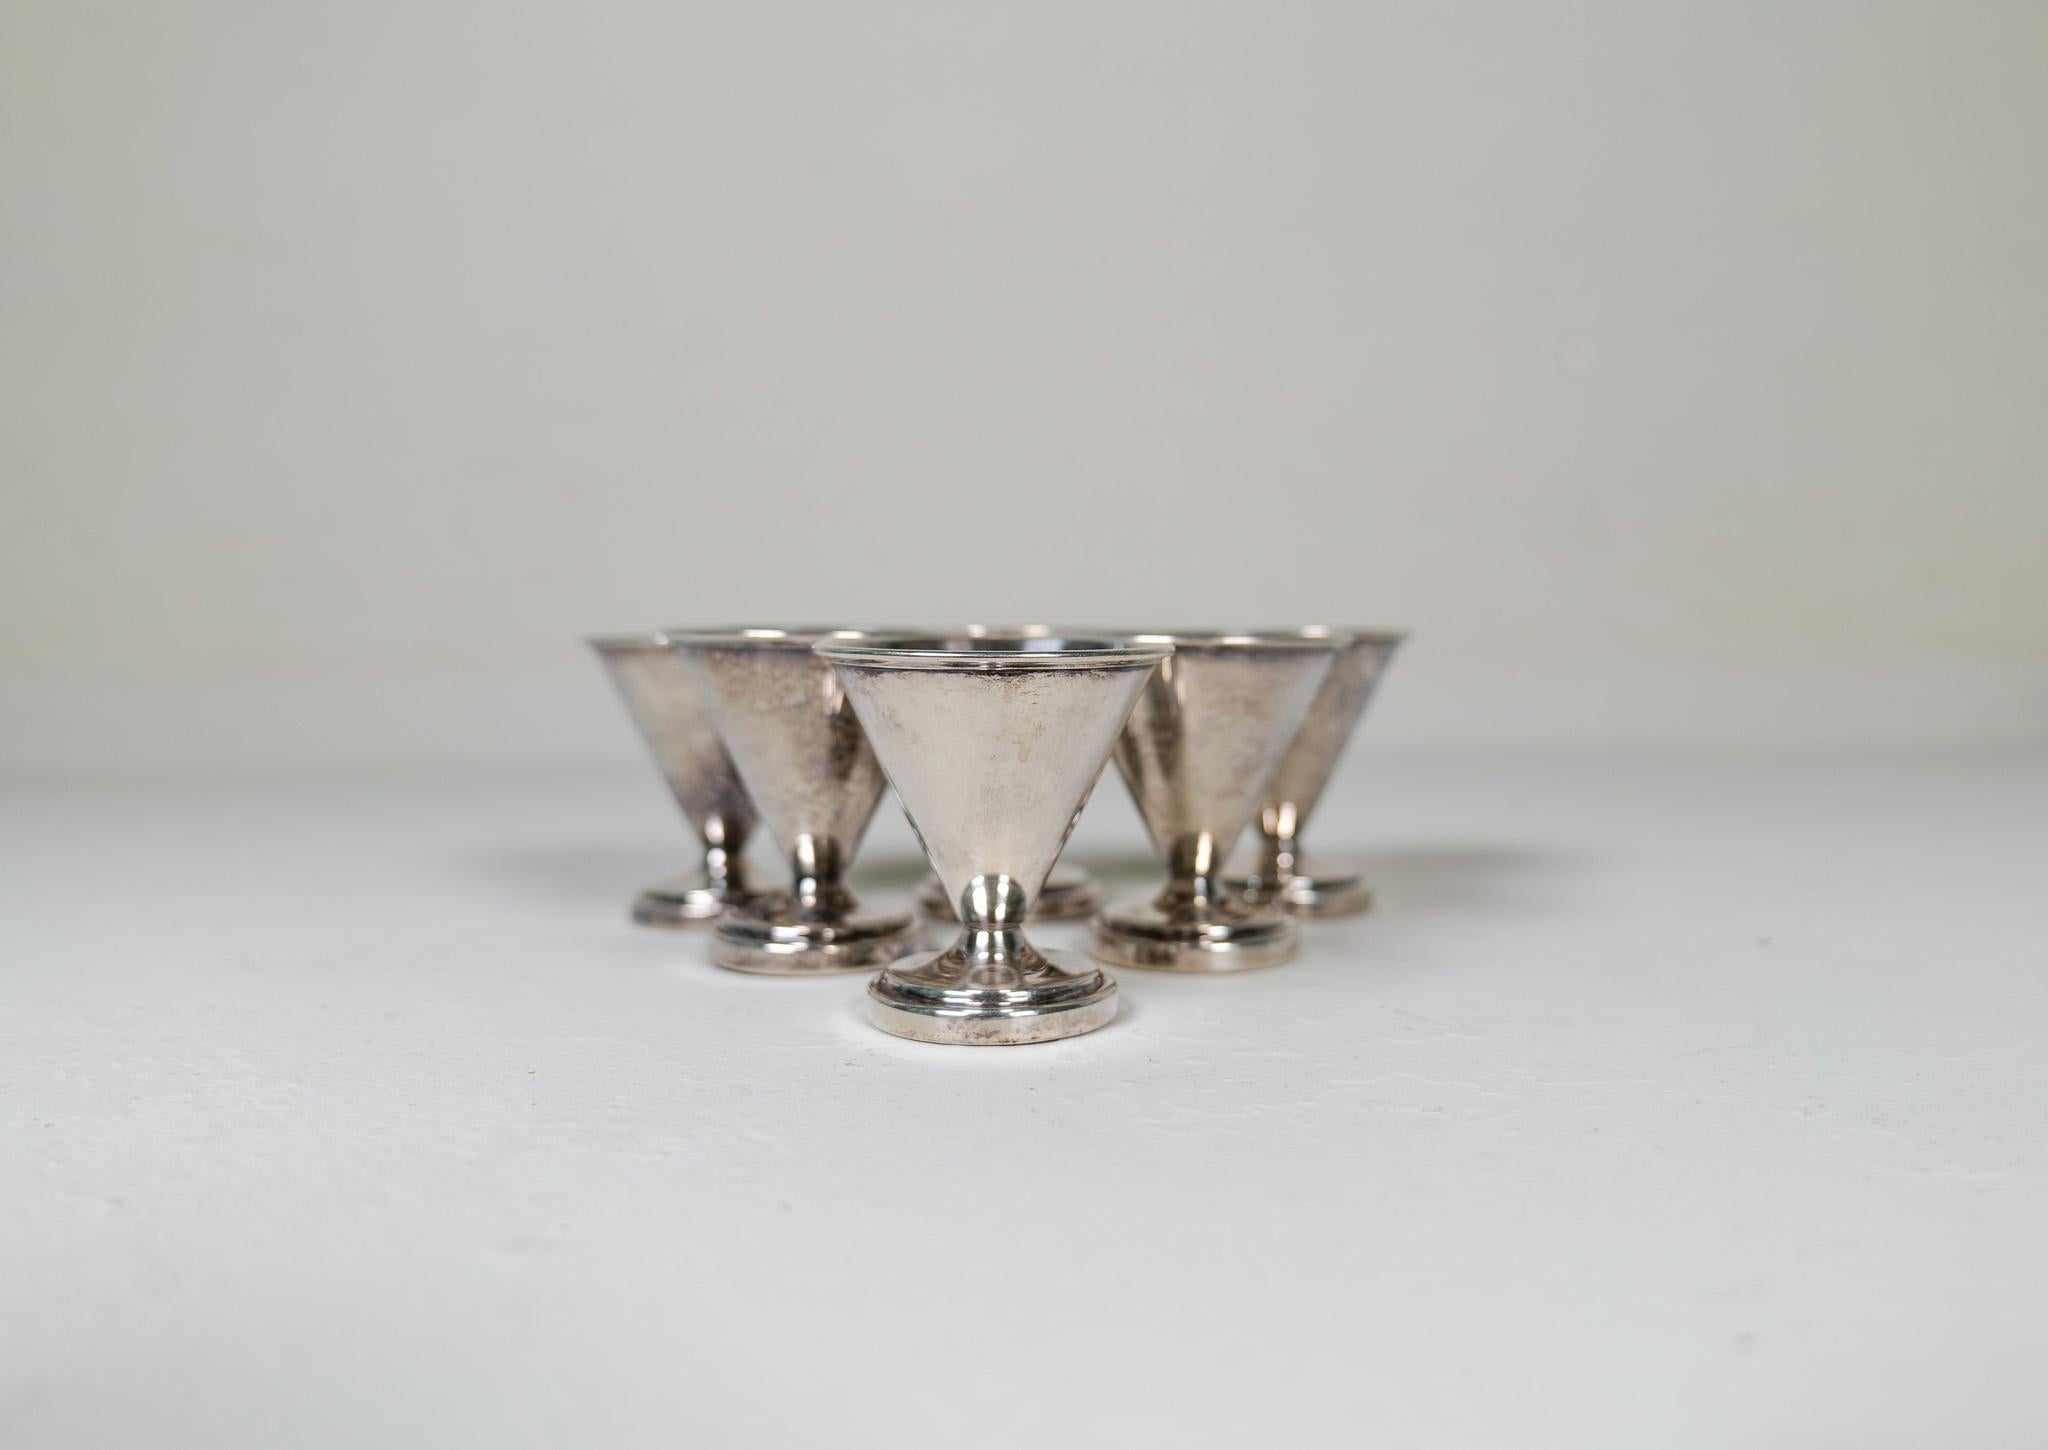 Art Deco Cocktail Shaker with 6 Small Glasses by Folke Arström, Sweden For Sale 3